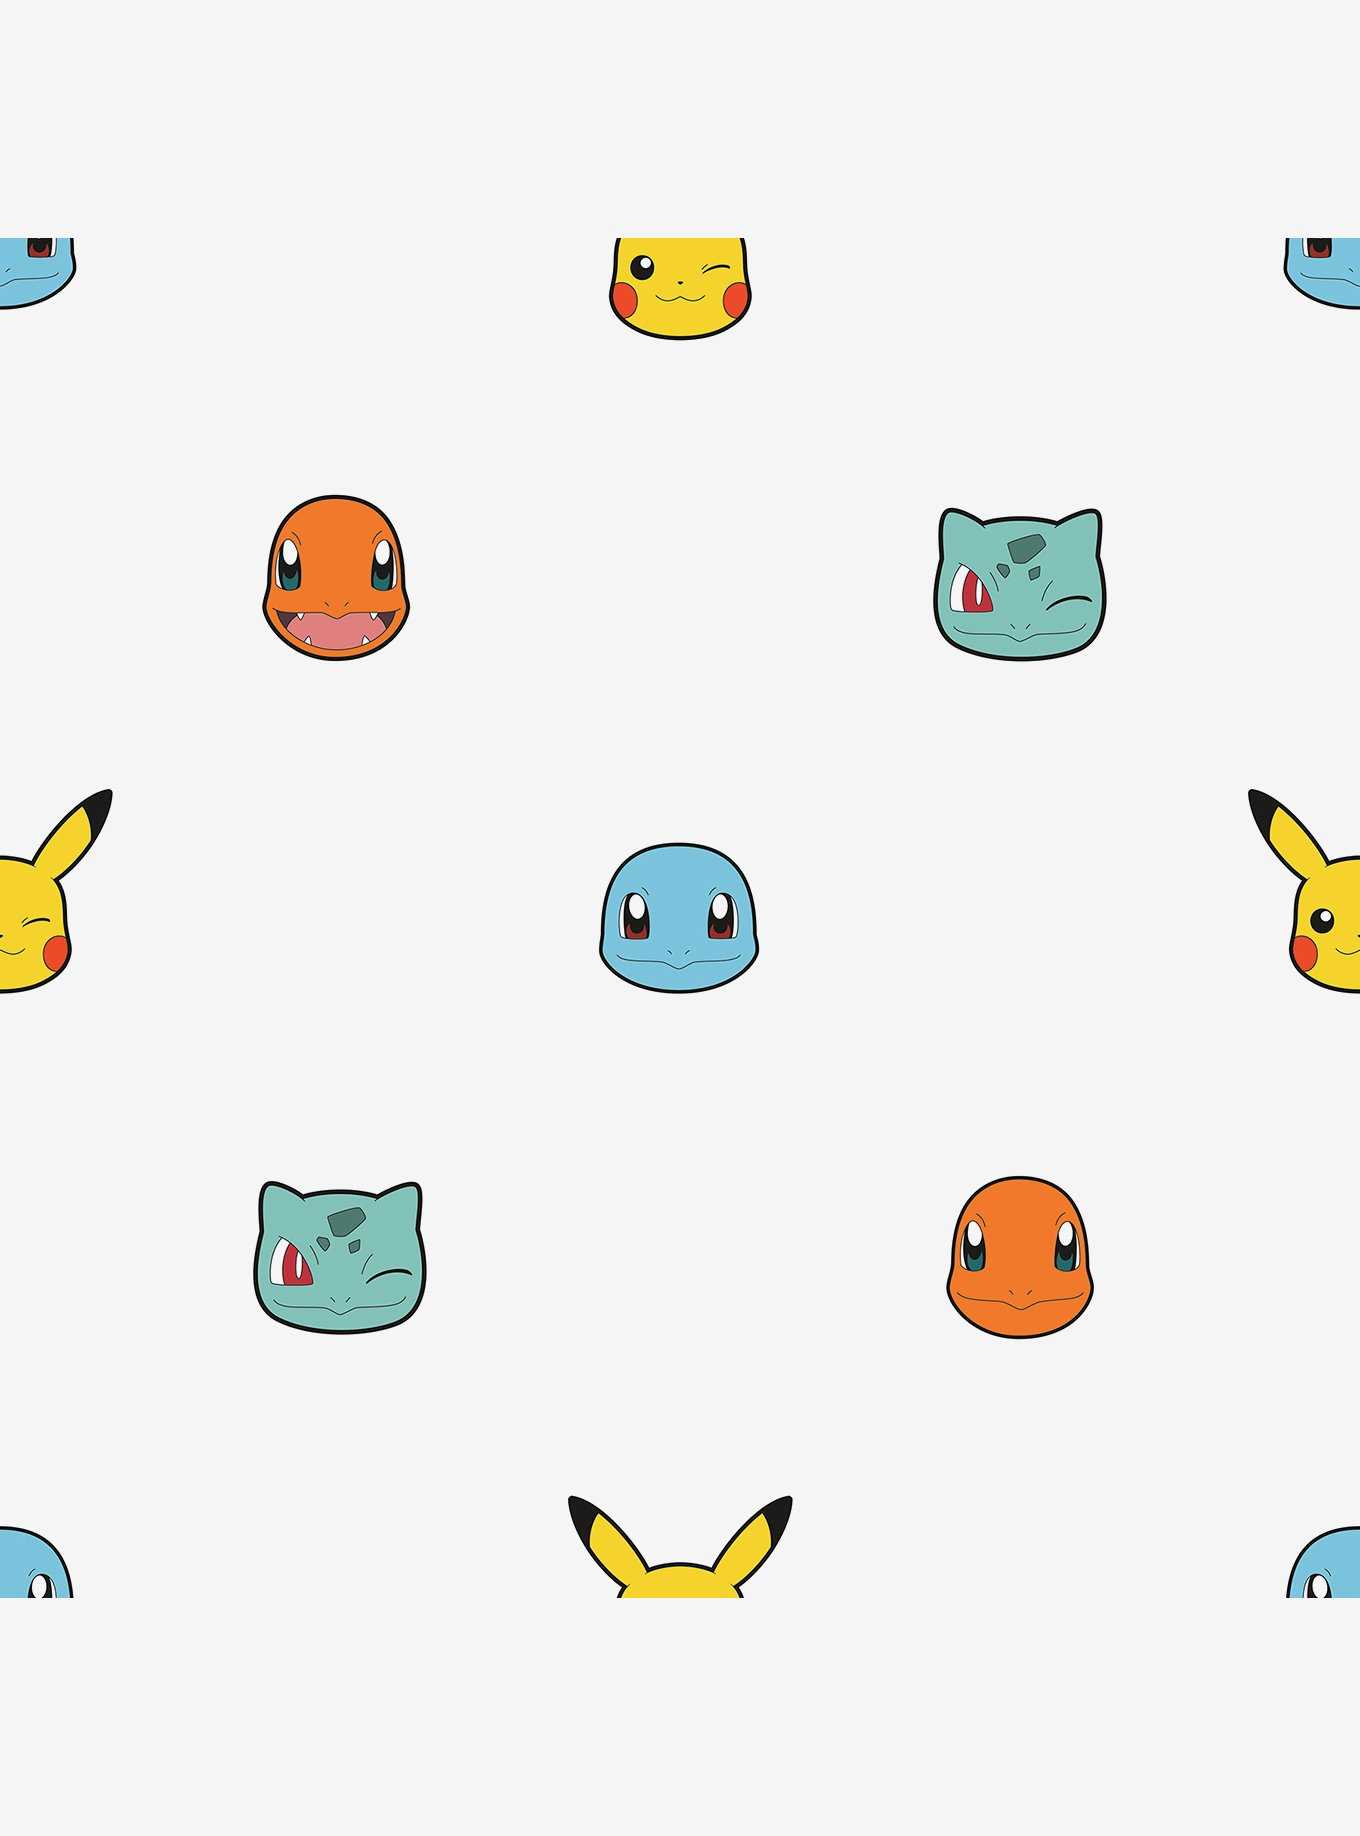 Pokemon Character Faces Peel and Stick Wallpaper, , hi-res